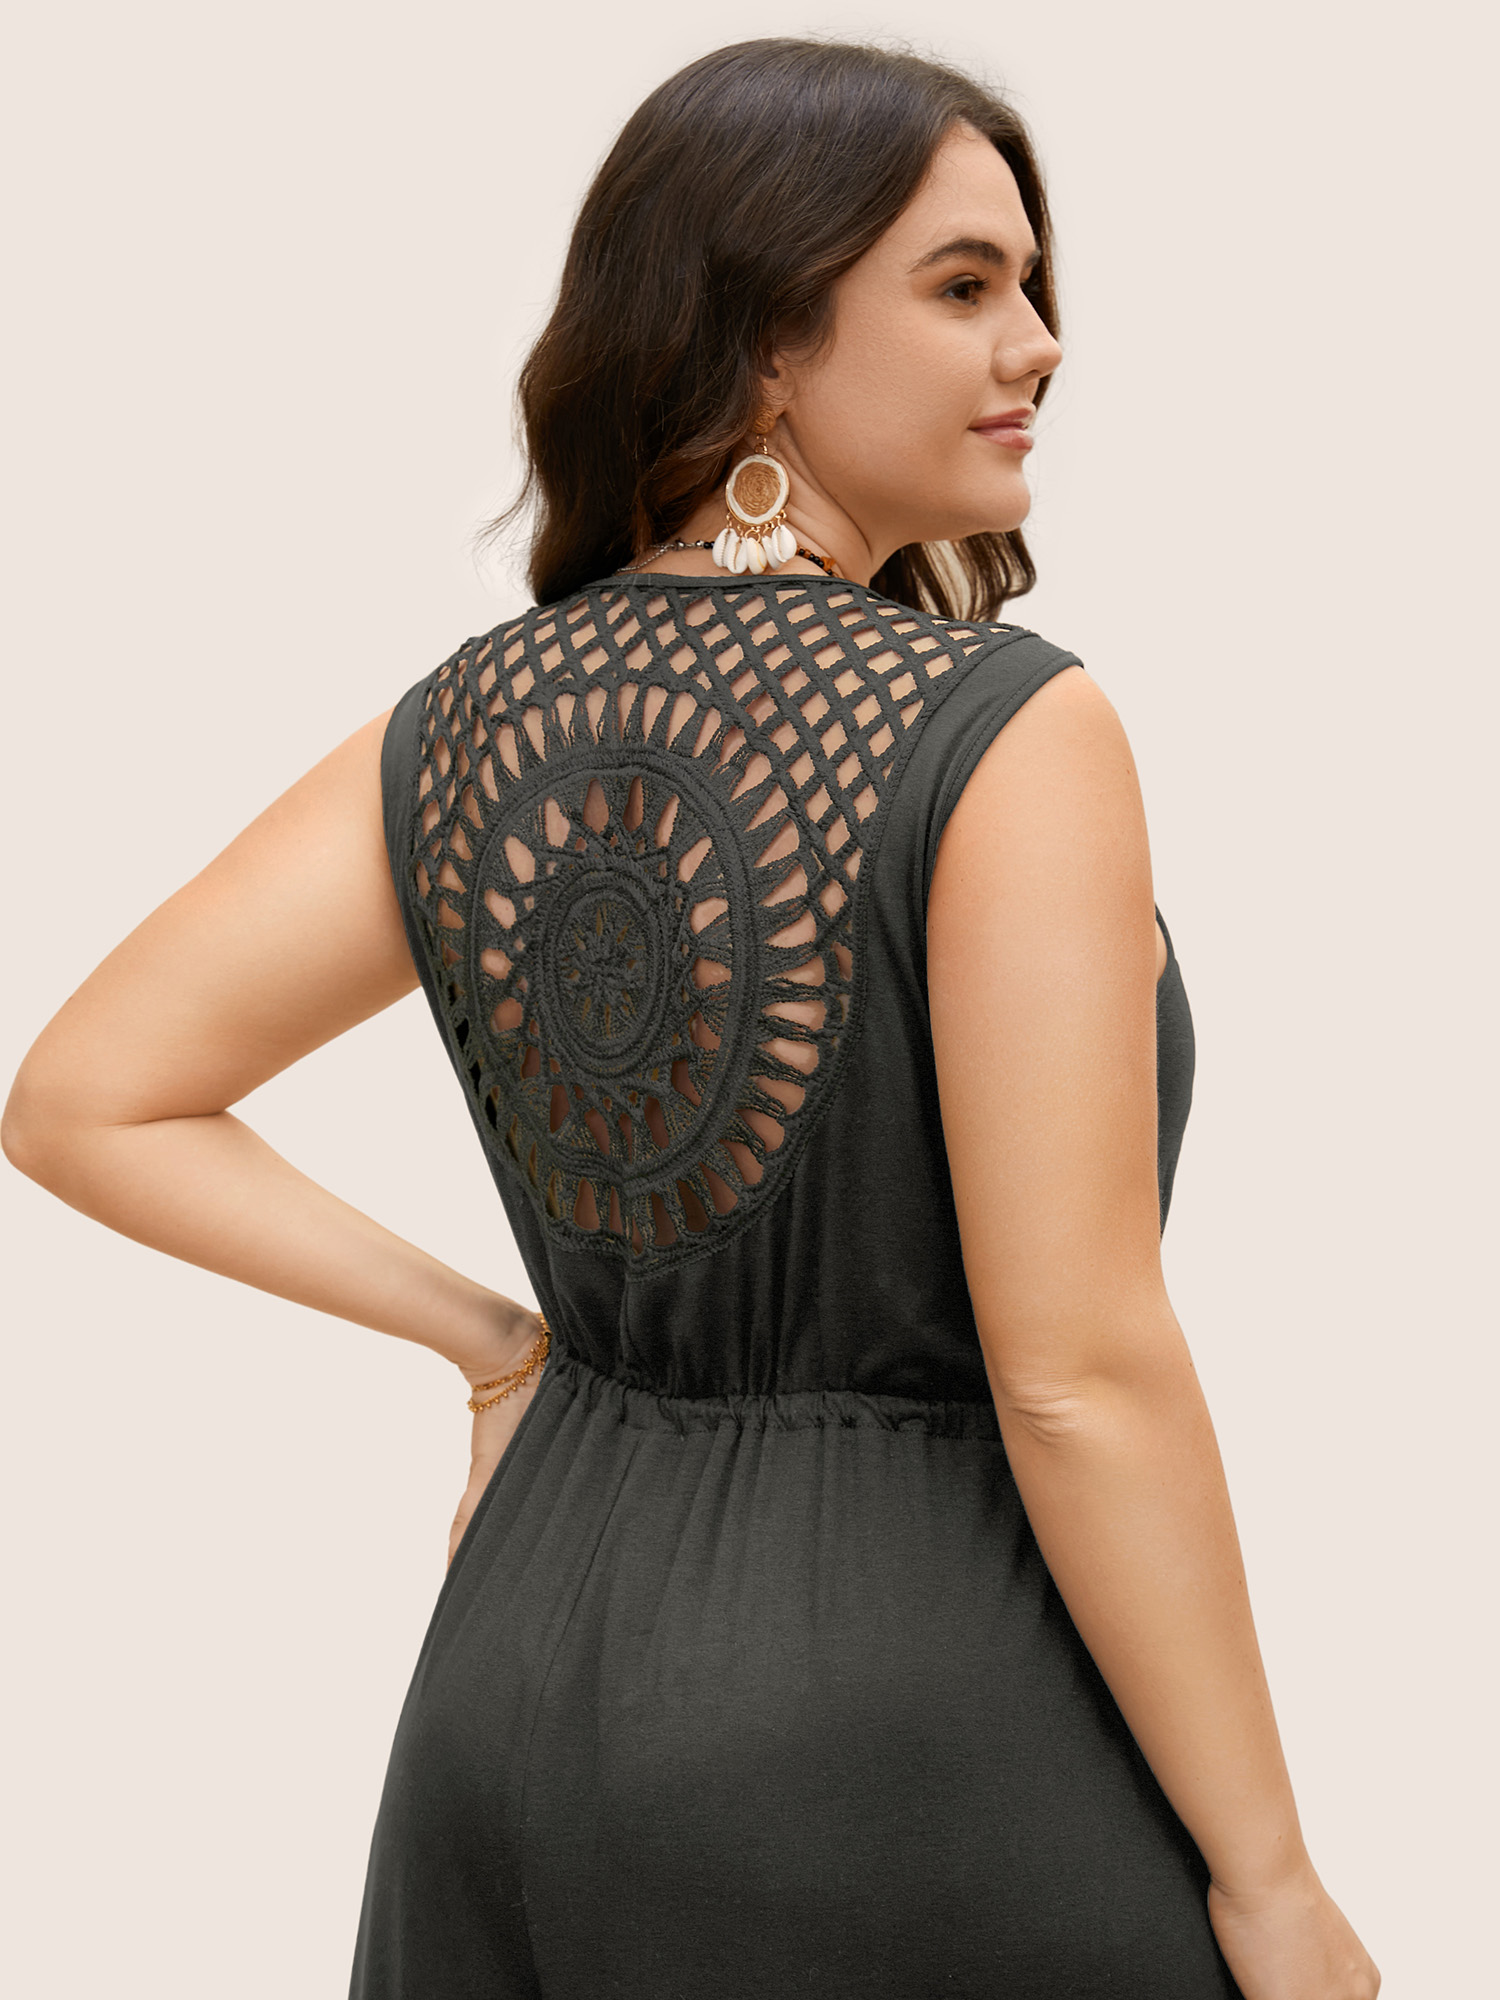 

Plus Size DimGray V Neck Crocheted Cut Out Jumpsuit Women Resort Sleeveless V-neck Vacation Loose Jumpsuits BloomChic